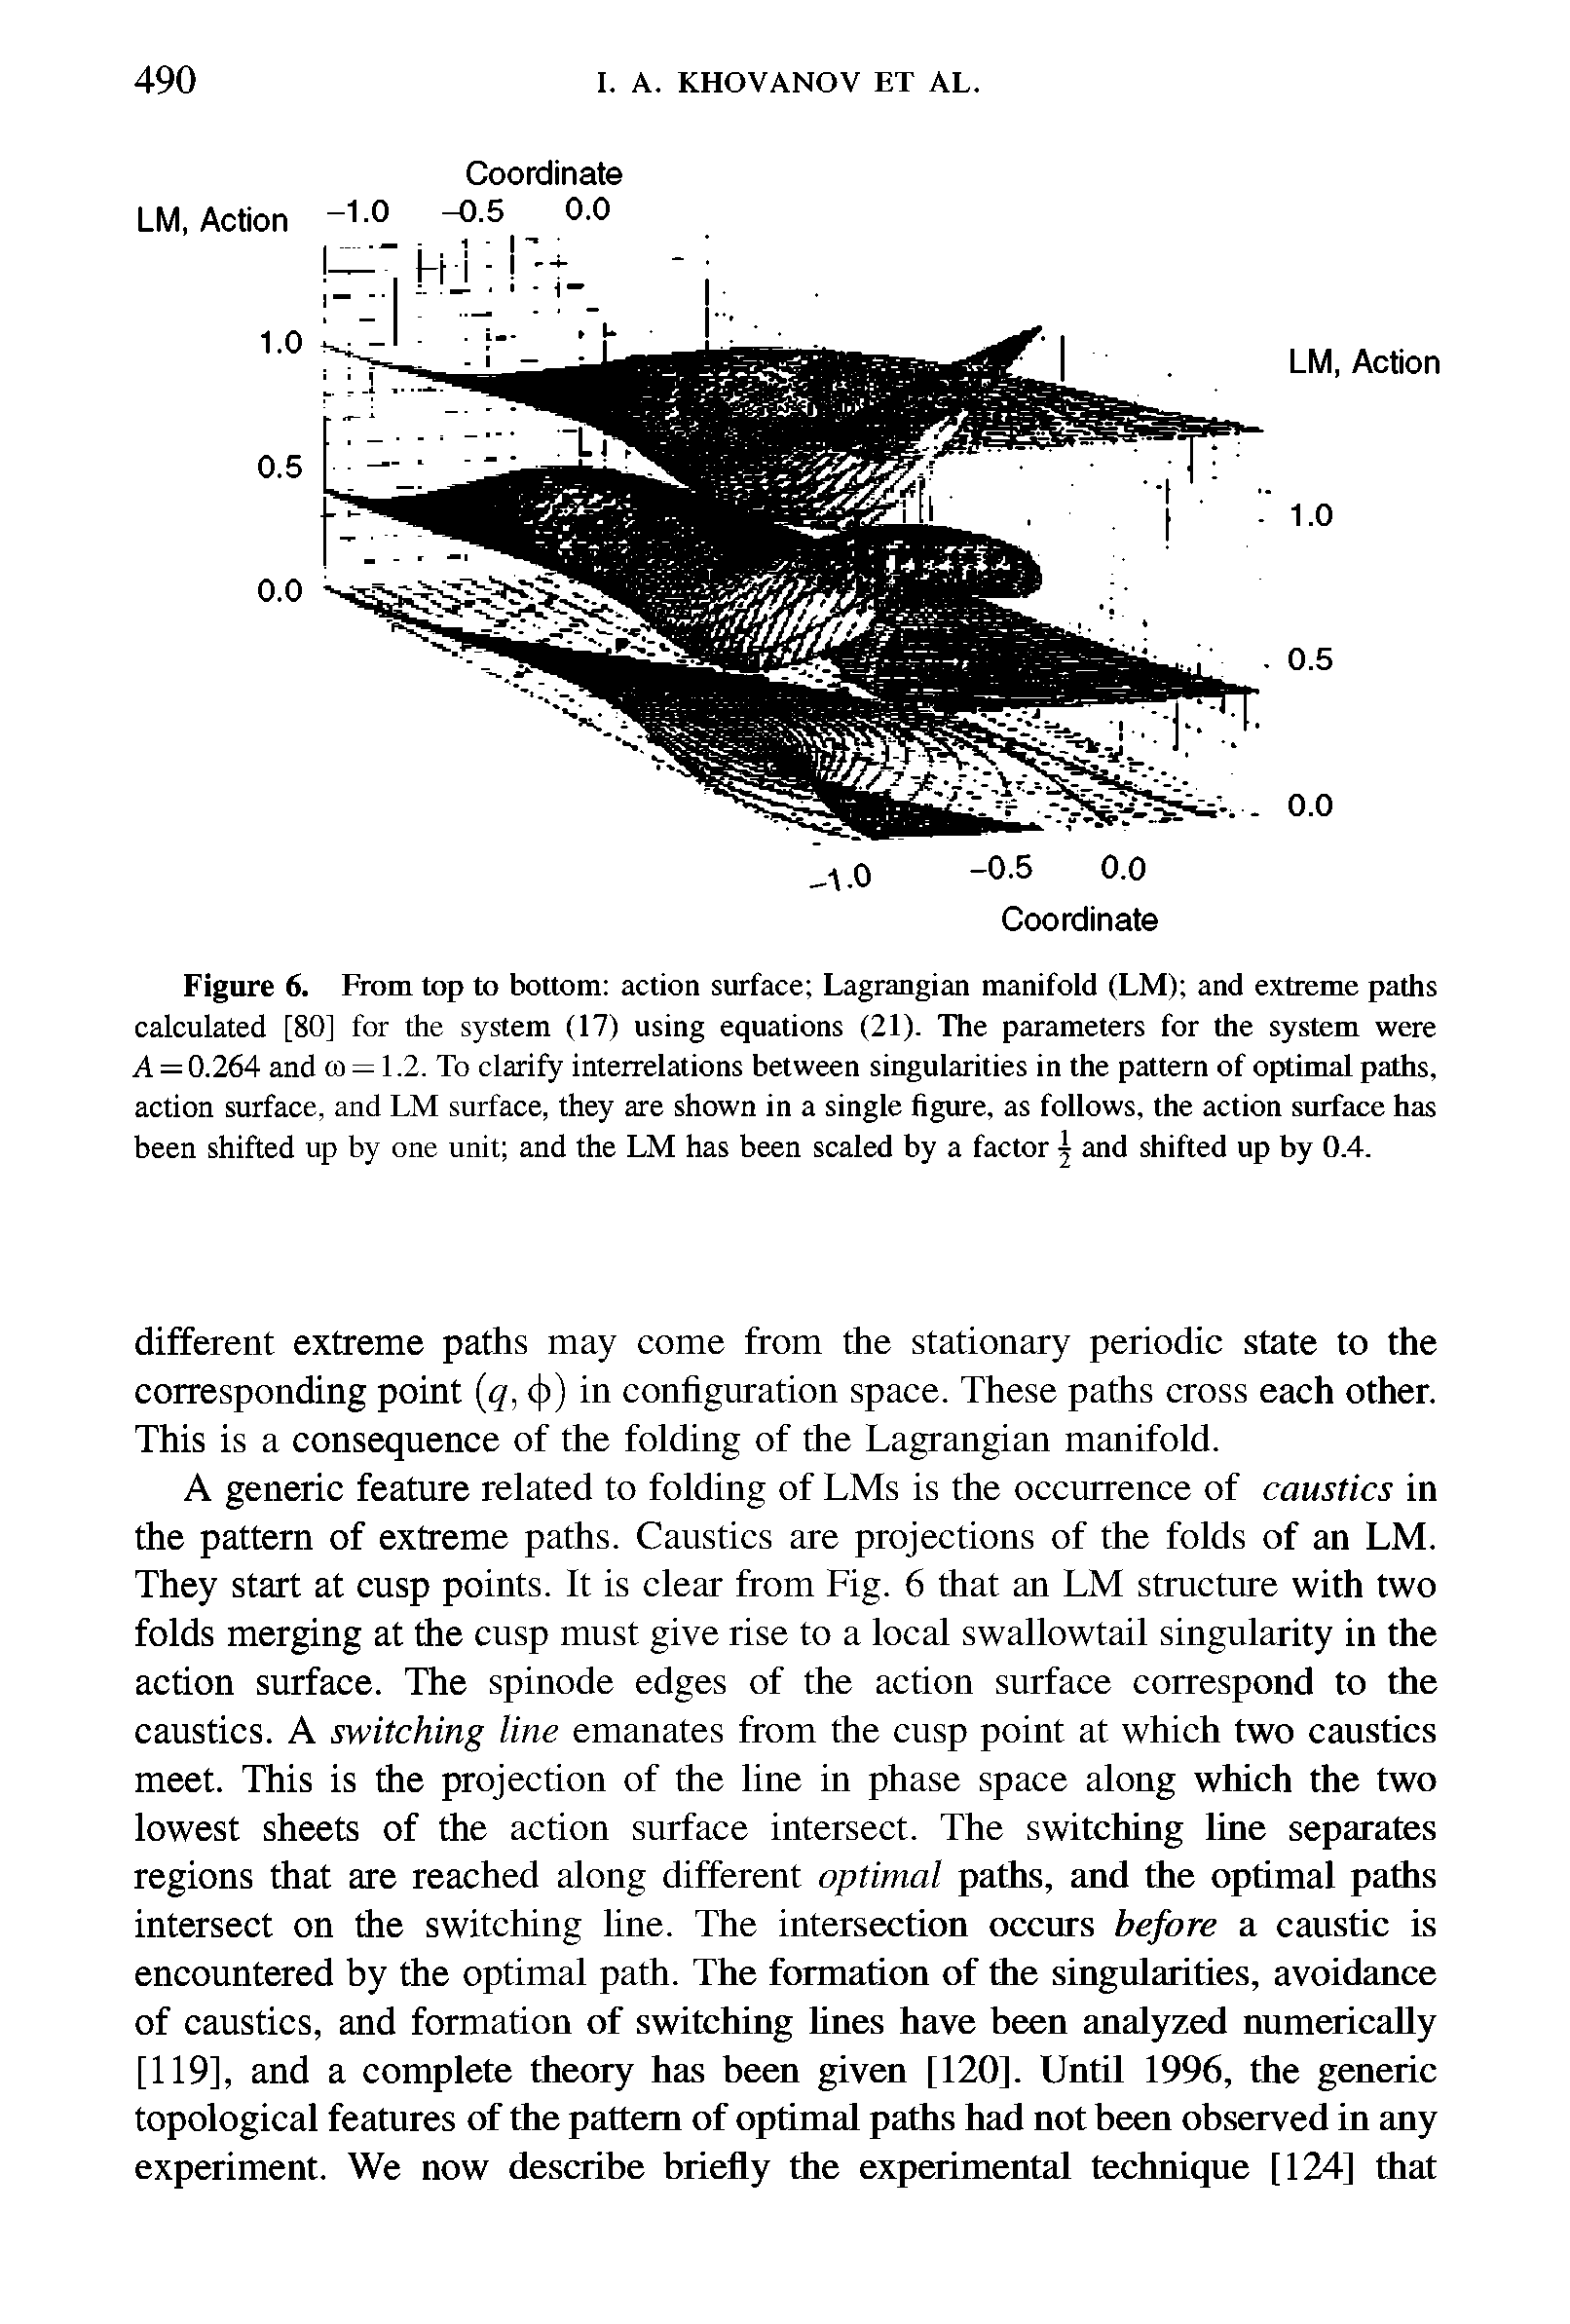 Figure 6. From top to bottom action surface Lagrangian manifold (LM) and extreme paths calculated [80] for the system (17) using equations (21). The parameters for the system were A = 0.264 and <n —1.2. To clarify interrelations between singularities in the pattern of optimal paths, action surface, and LM surface, they are shown in a single figure, as follows, the action surface has been shifted up by one unit and the LM has been scaled by a factor j and shifted up by 0.4.